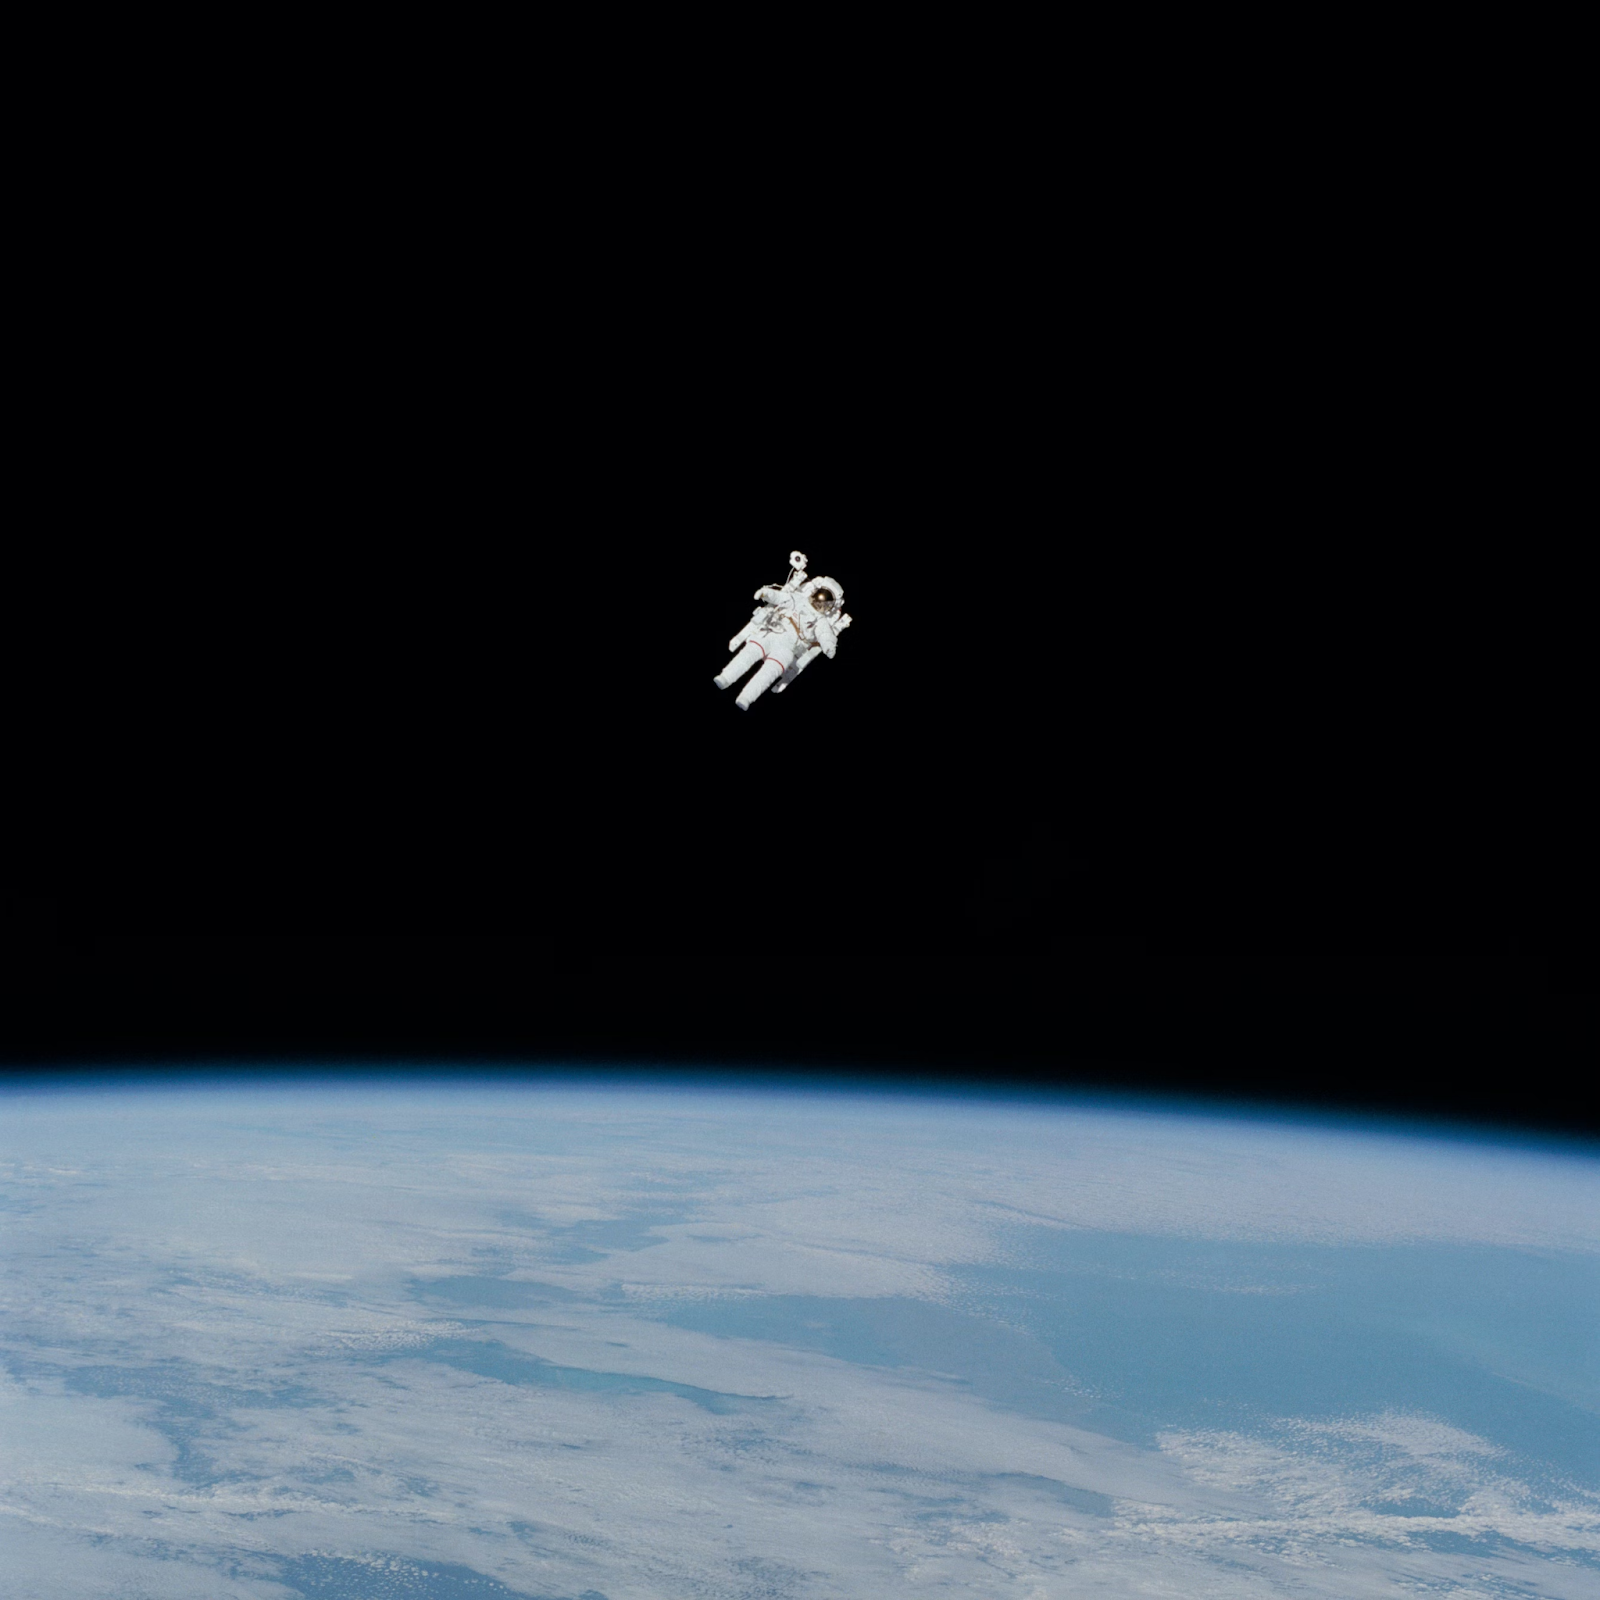 Astronaut floating in space above Earth.